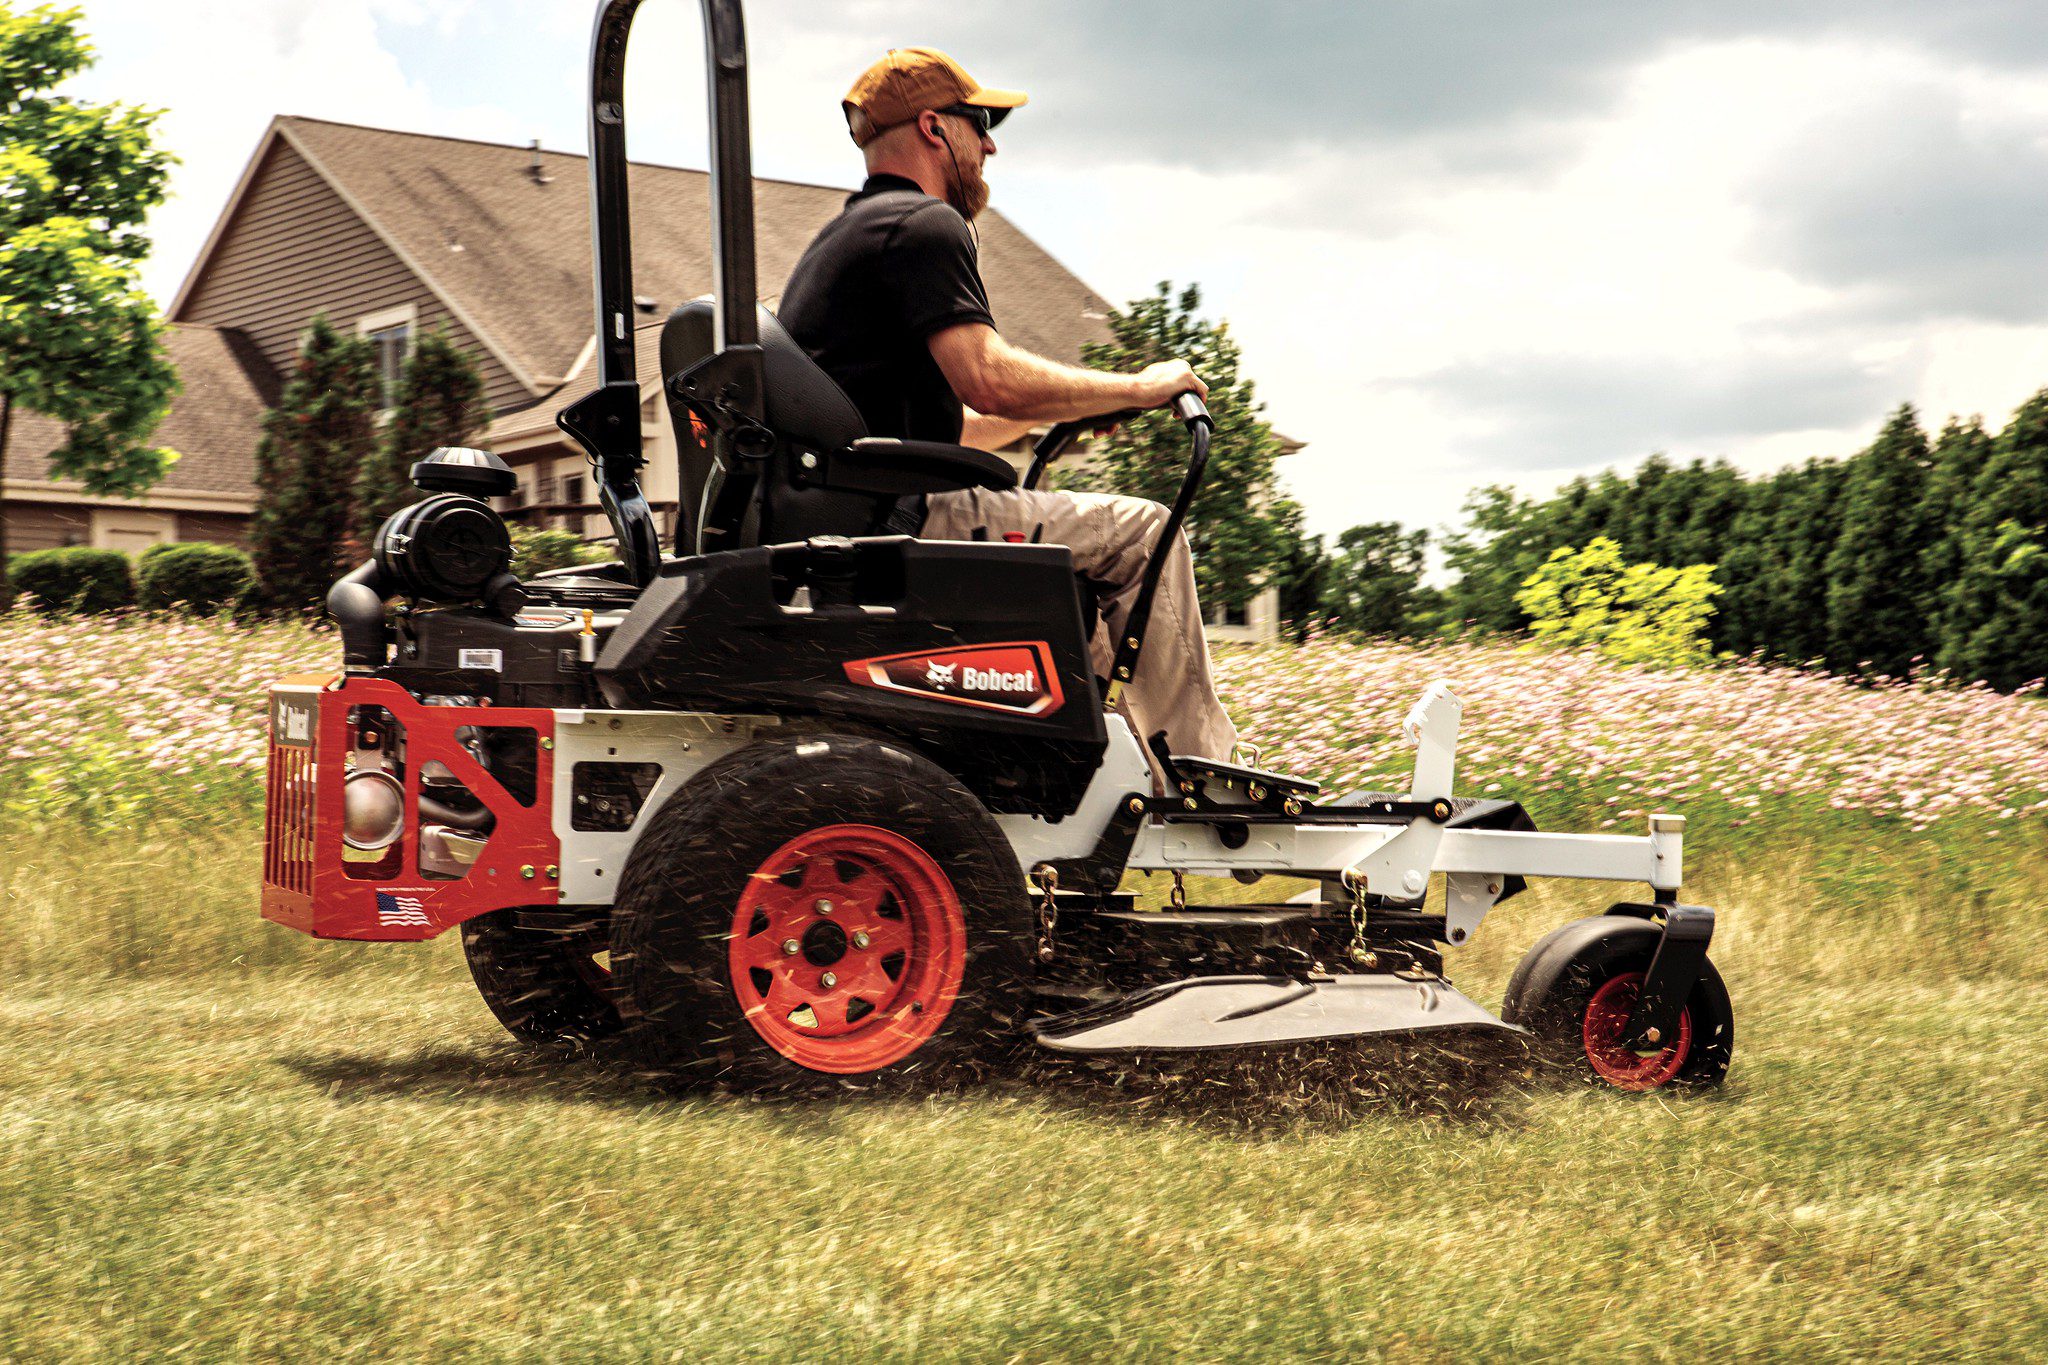 Browse Specs and more for the ZT3500 Zero-Turn Mower 61″ - Bobcat of Huntsville